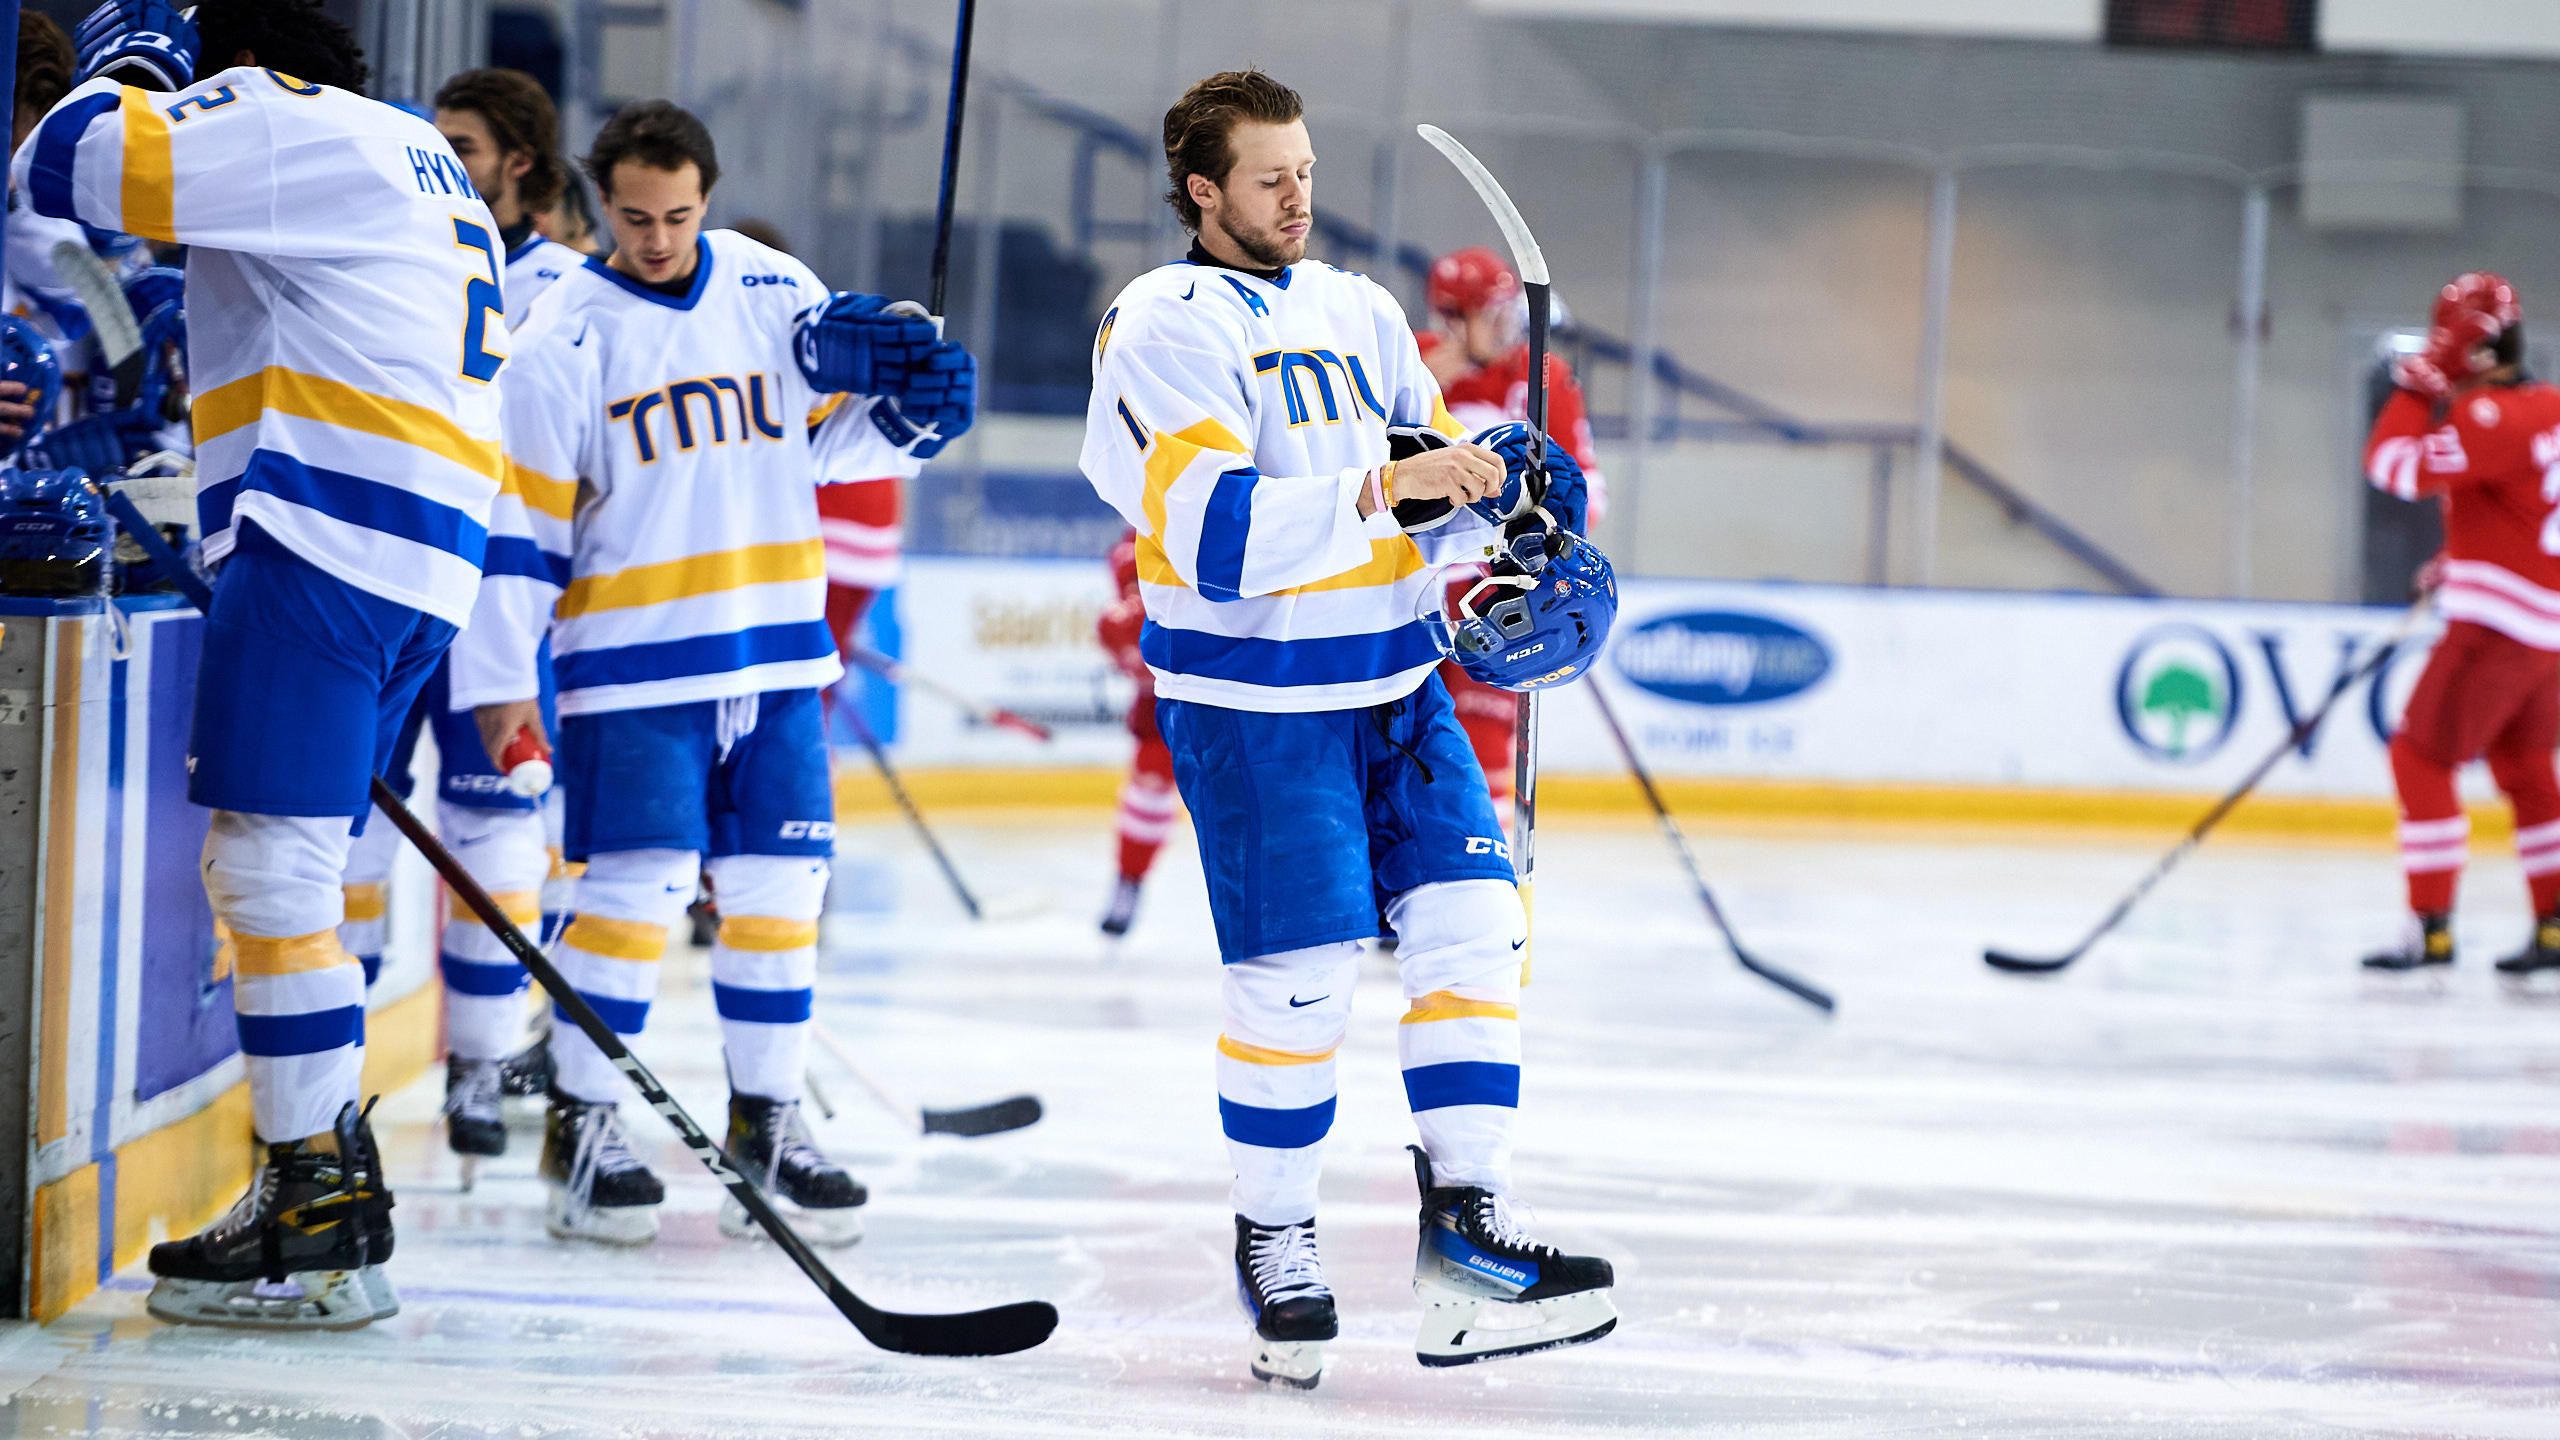 Members of the TMU Bold men's hockey team on the ice at the Mattamy Athletic Centre